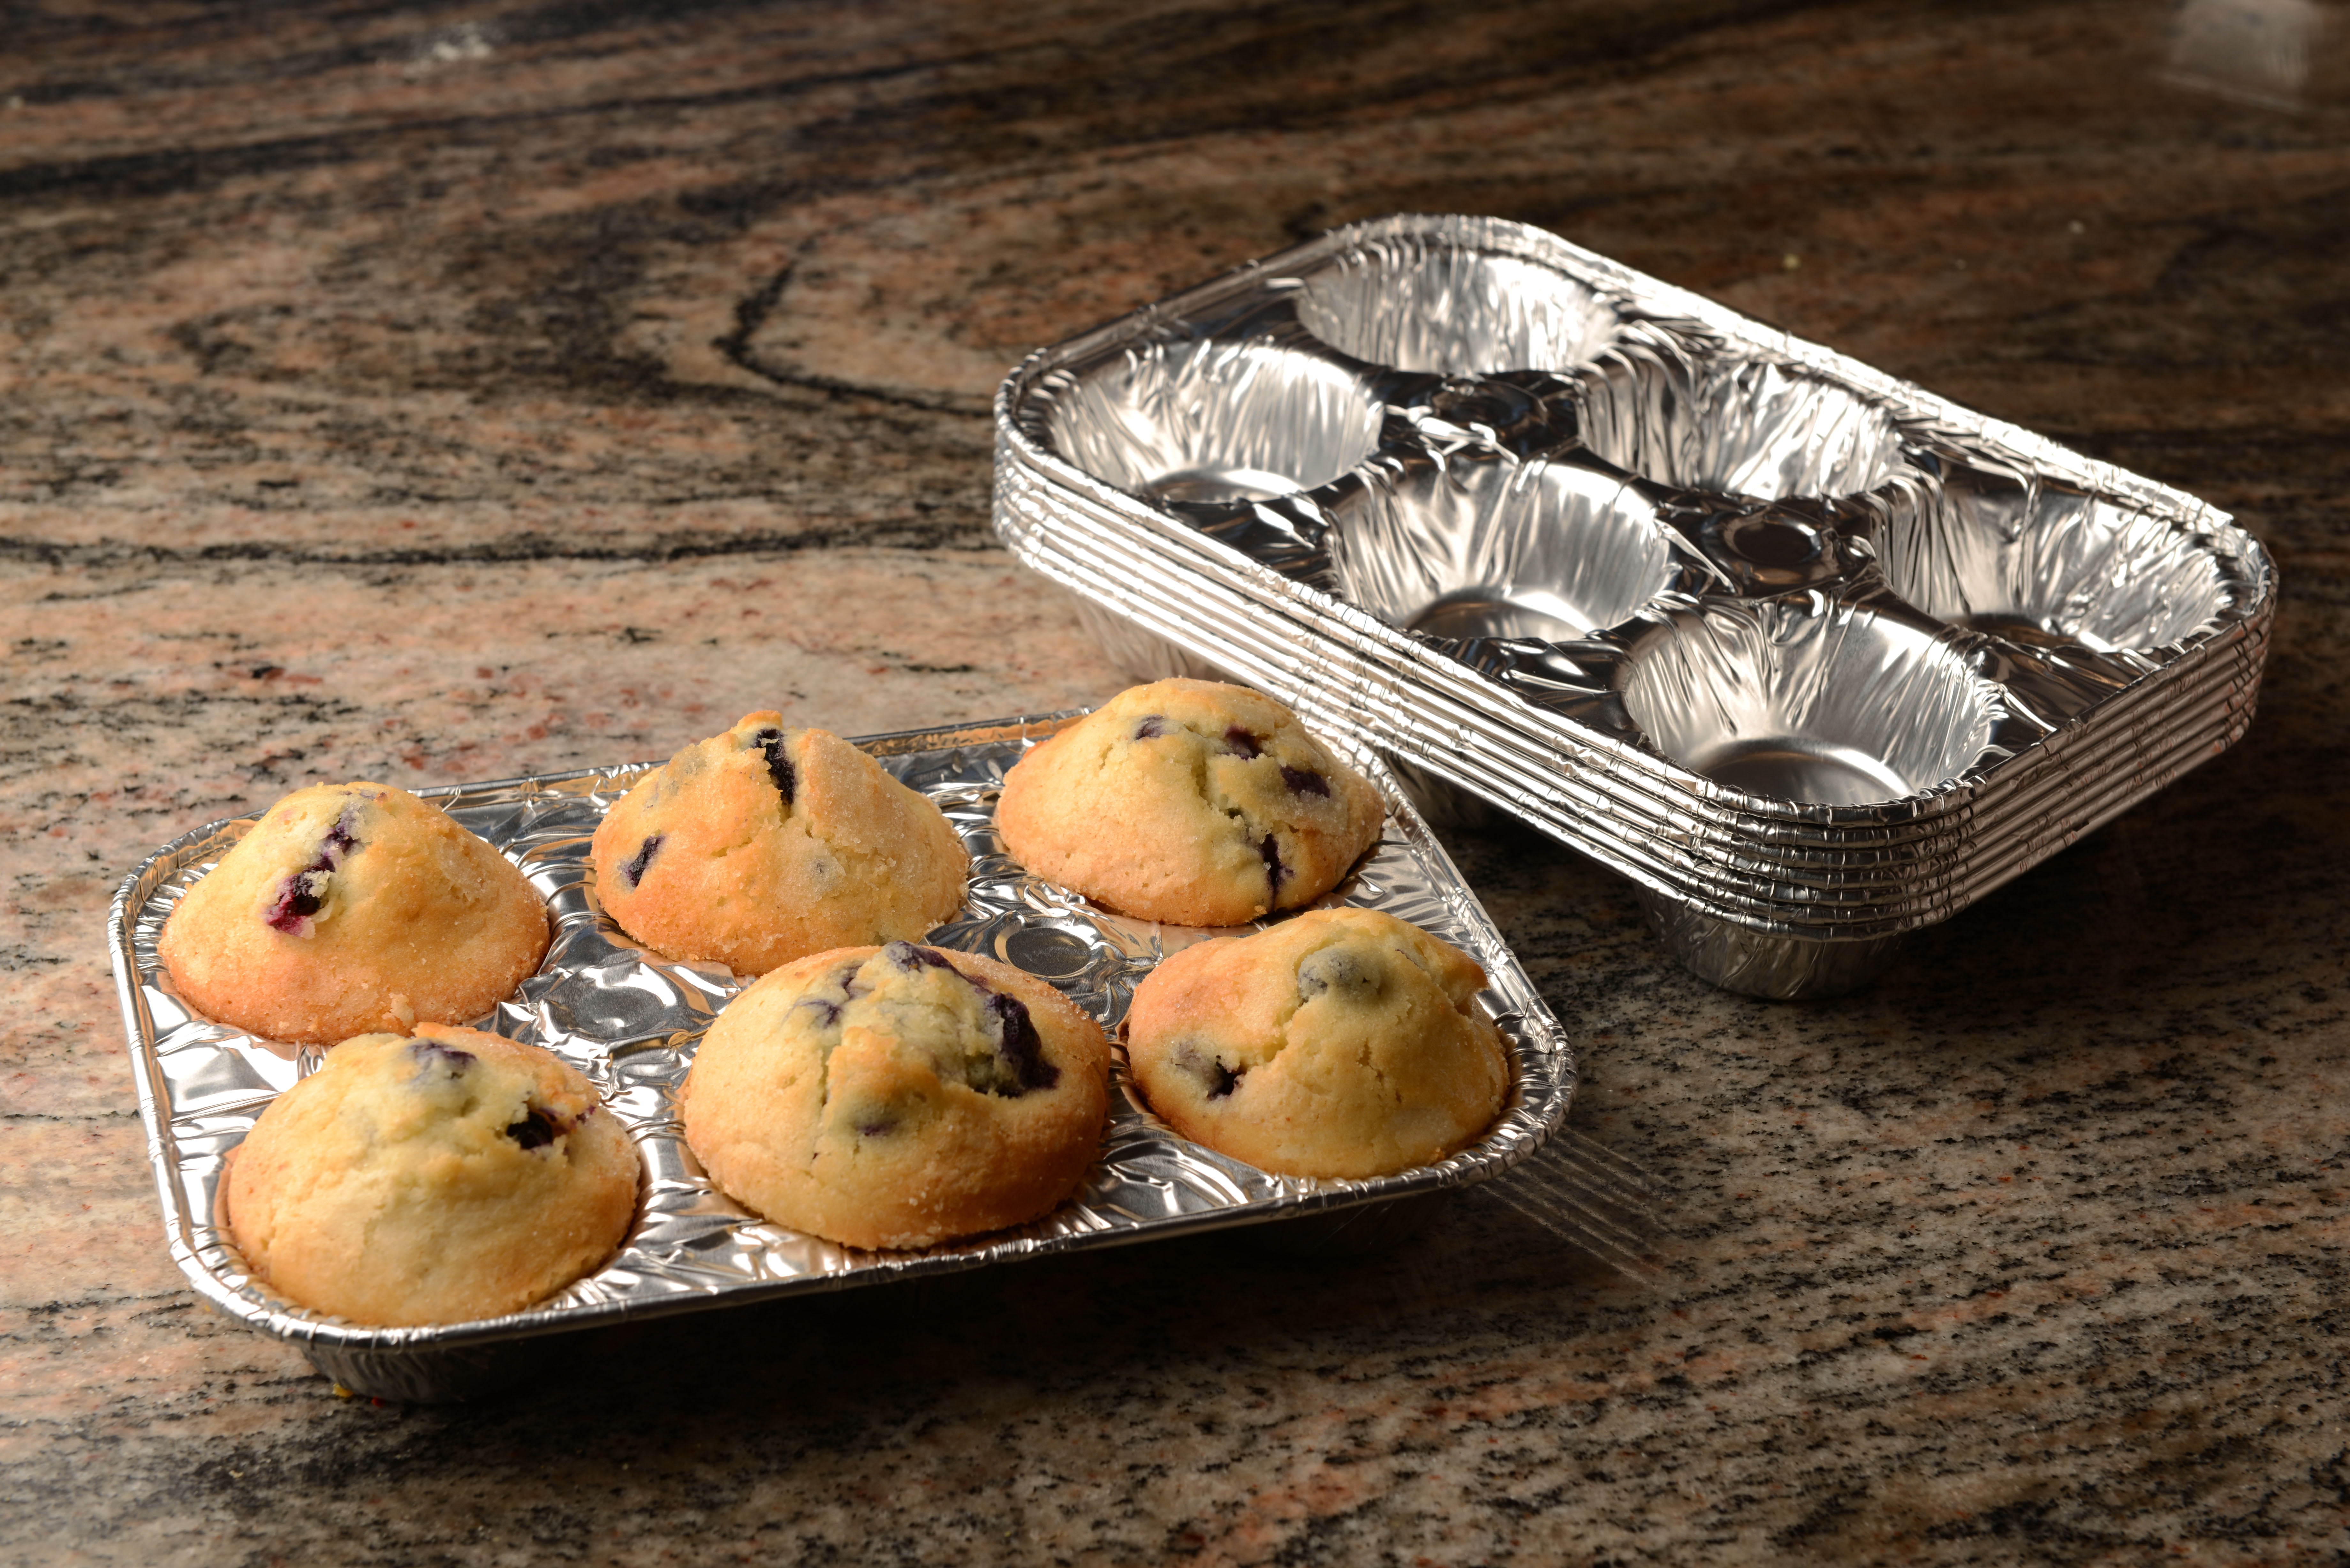 Durable 6-Cup Foil Muffin Pan 500/CS –